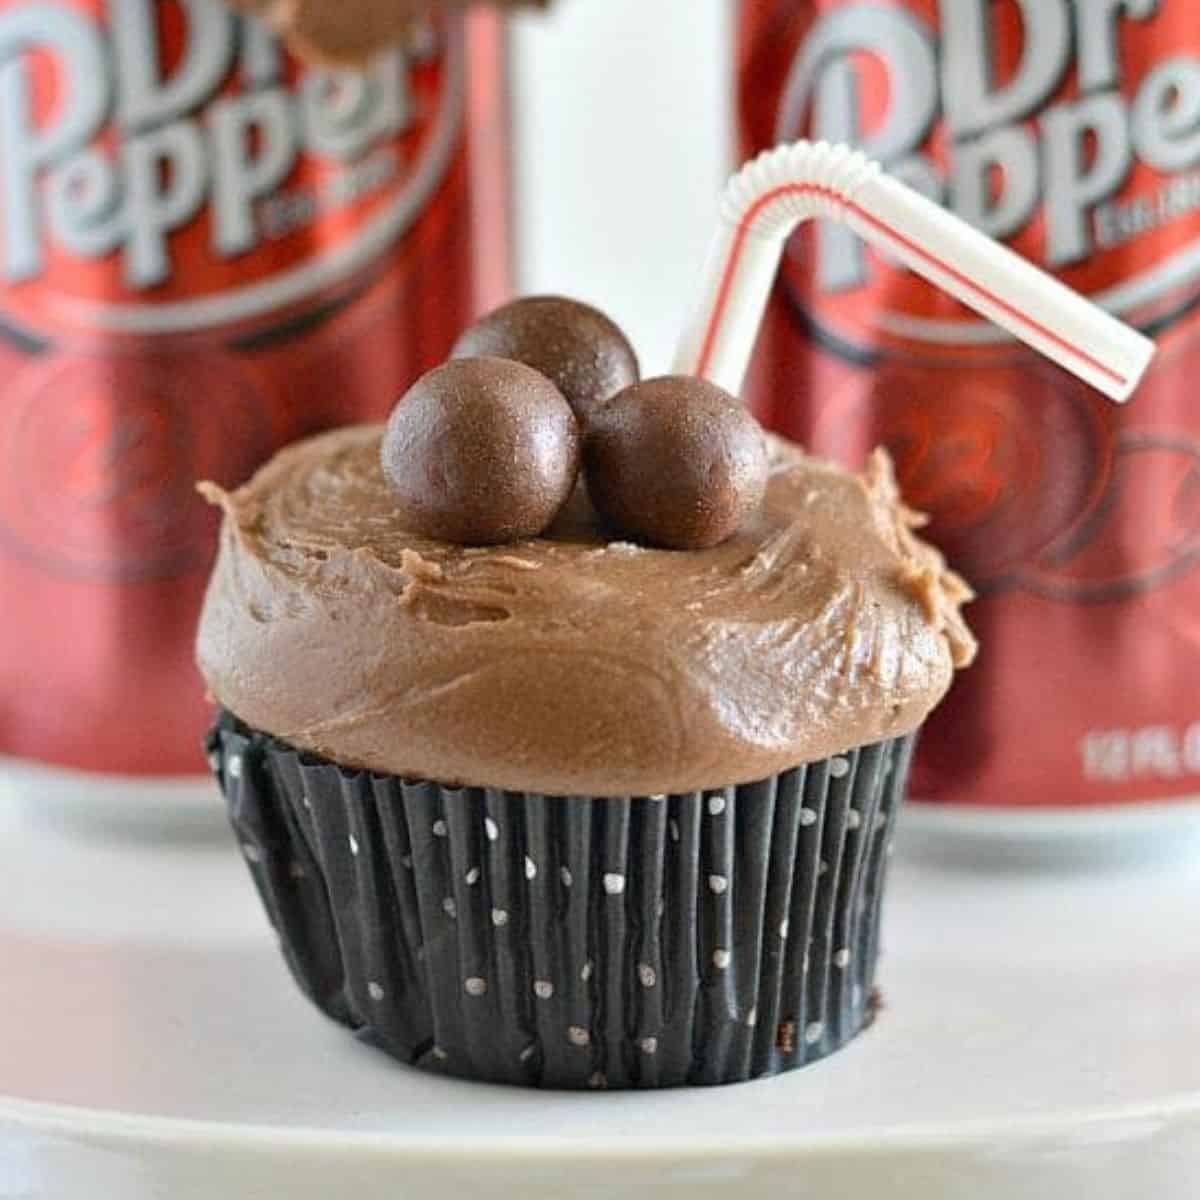 Dr Pepper Cupcakes with Pepper Frosting - This Vivacious